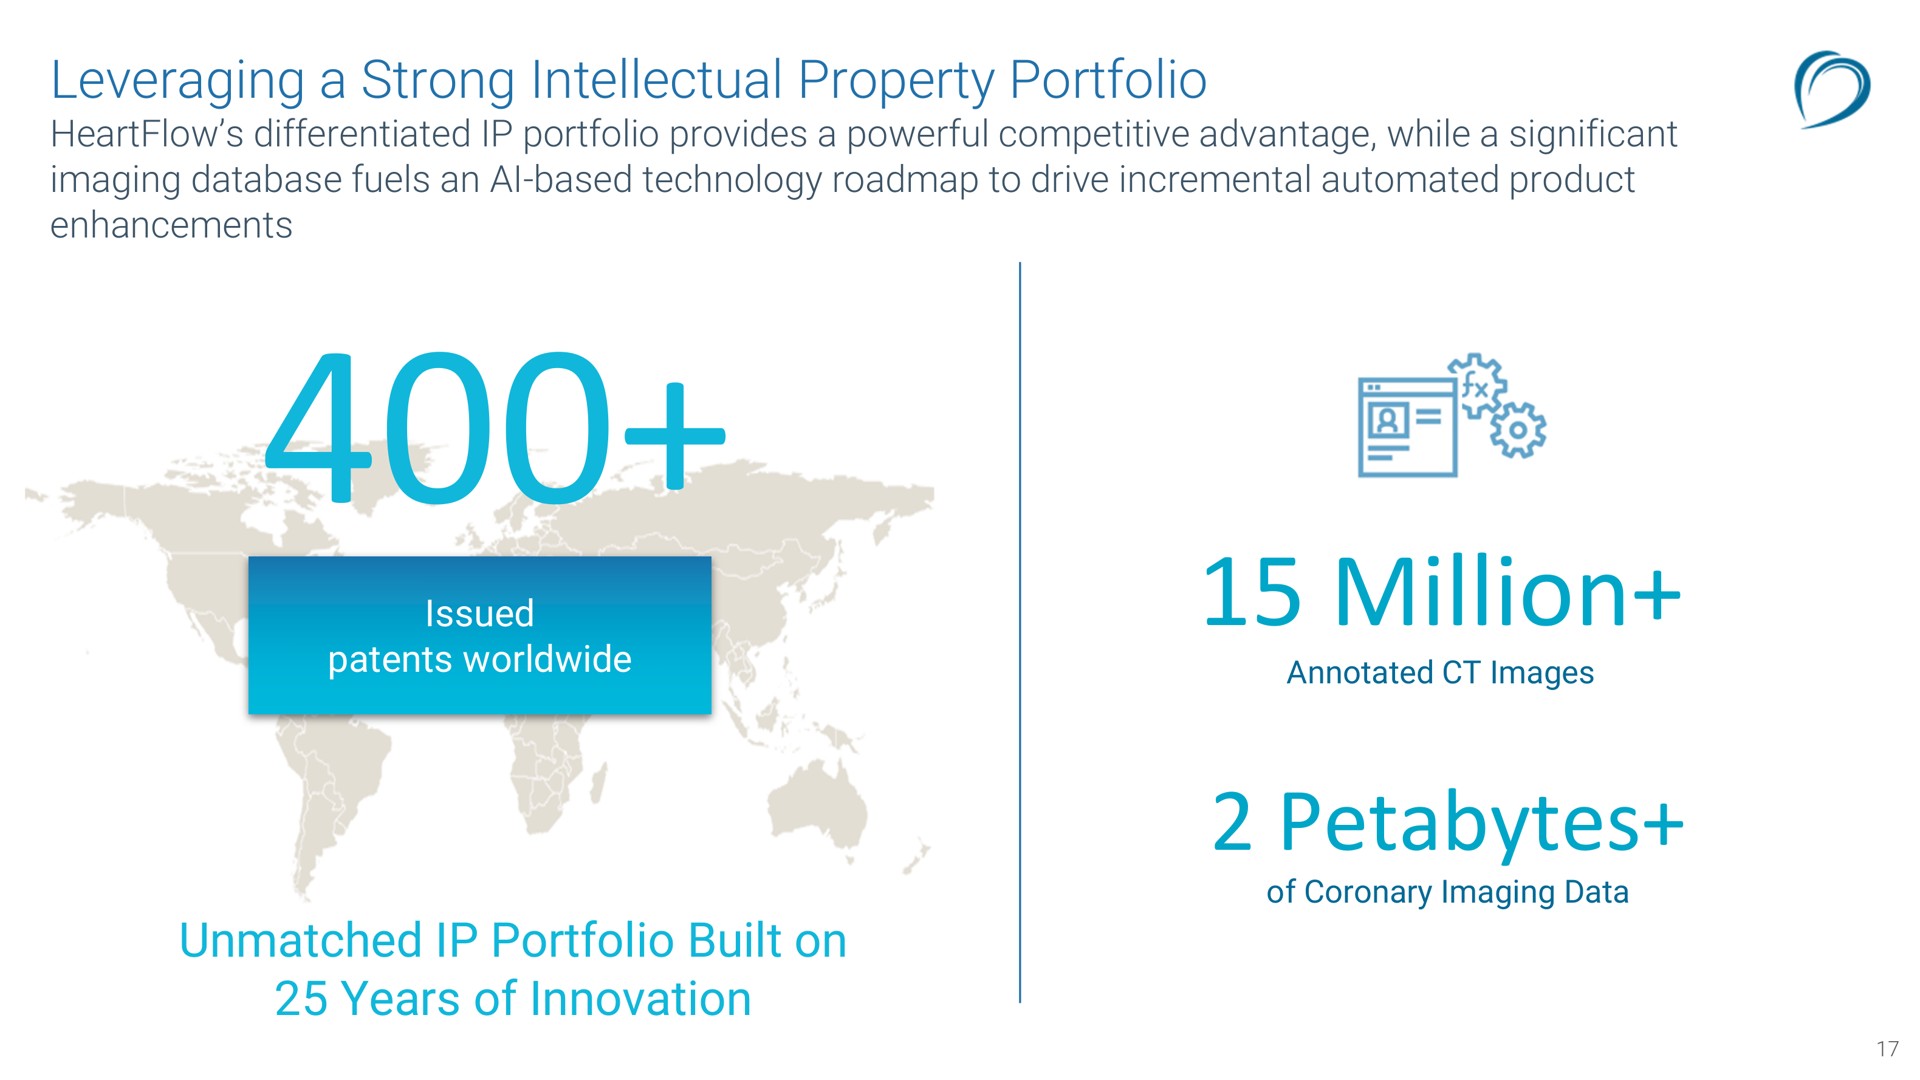 leveraging a strong intellectual property portfolio million unmatched portfolio built on years of innovation | HearFlow